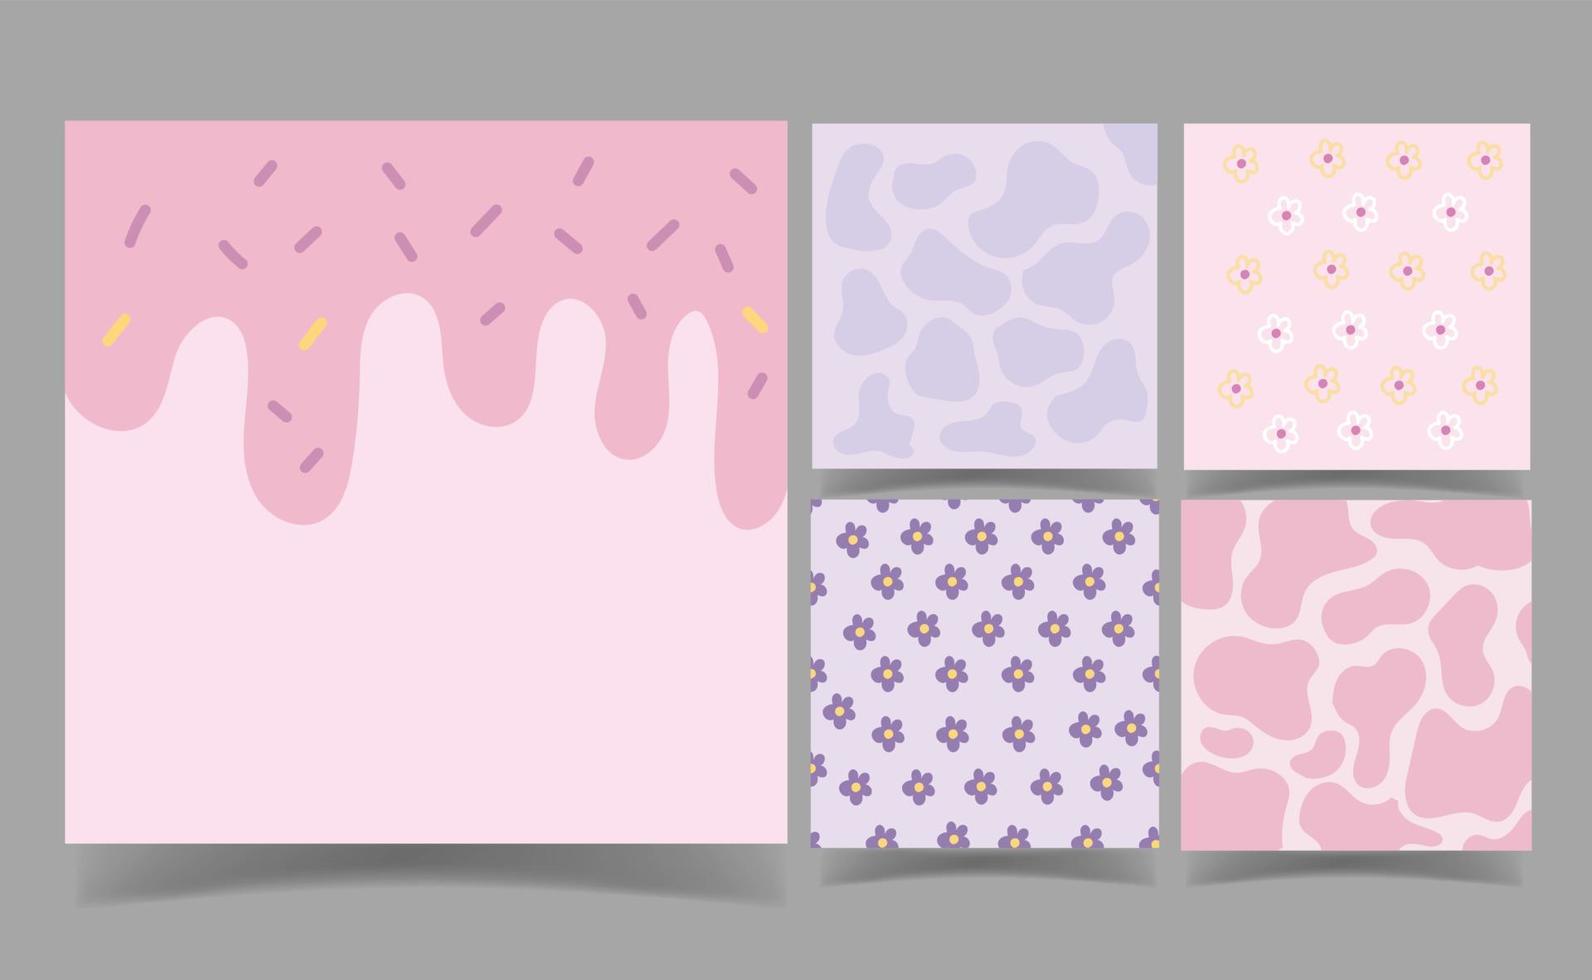 pink and pastel color memo notes Template for Greeting Scrap booking Card Design. abstract background. wallpaper wrapping paper. vector